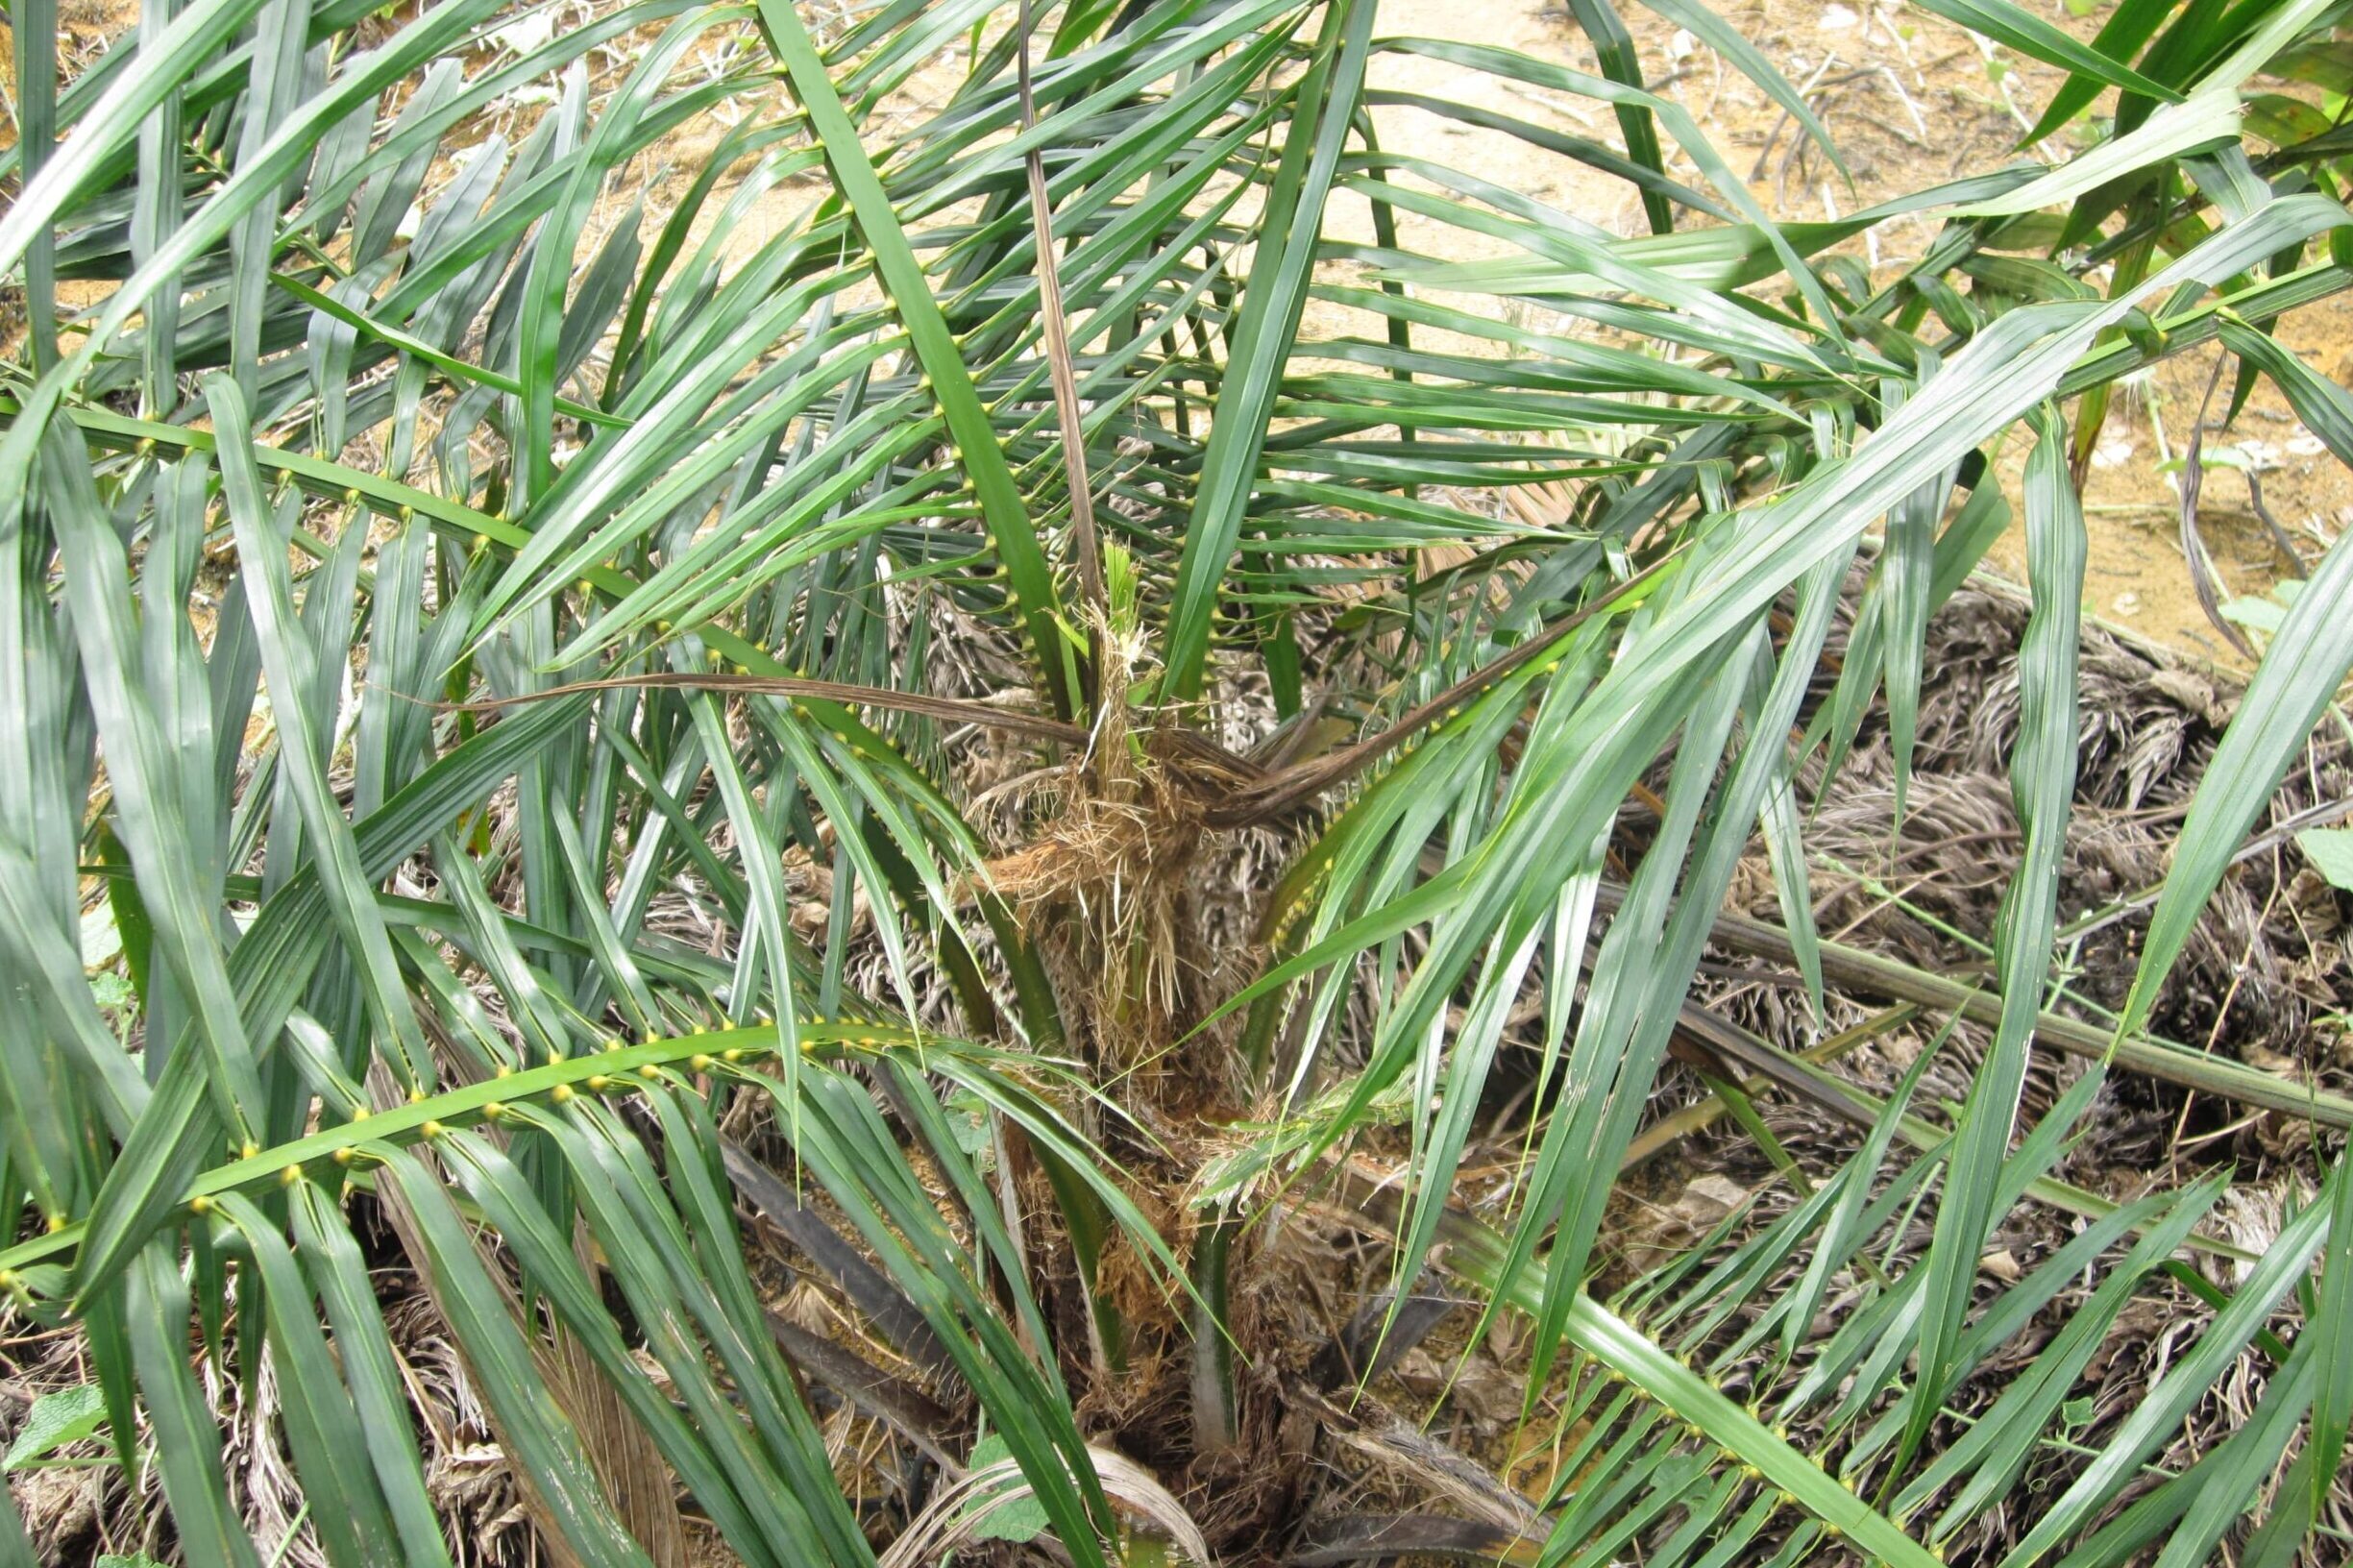 Spear snapping oil palm caused by rhinoceros beetle